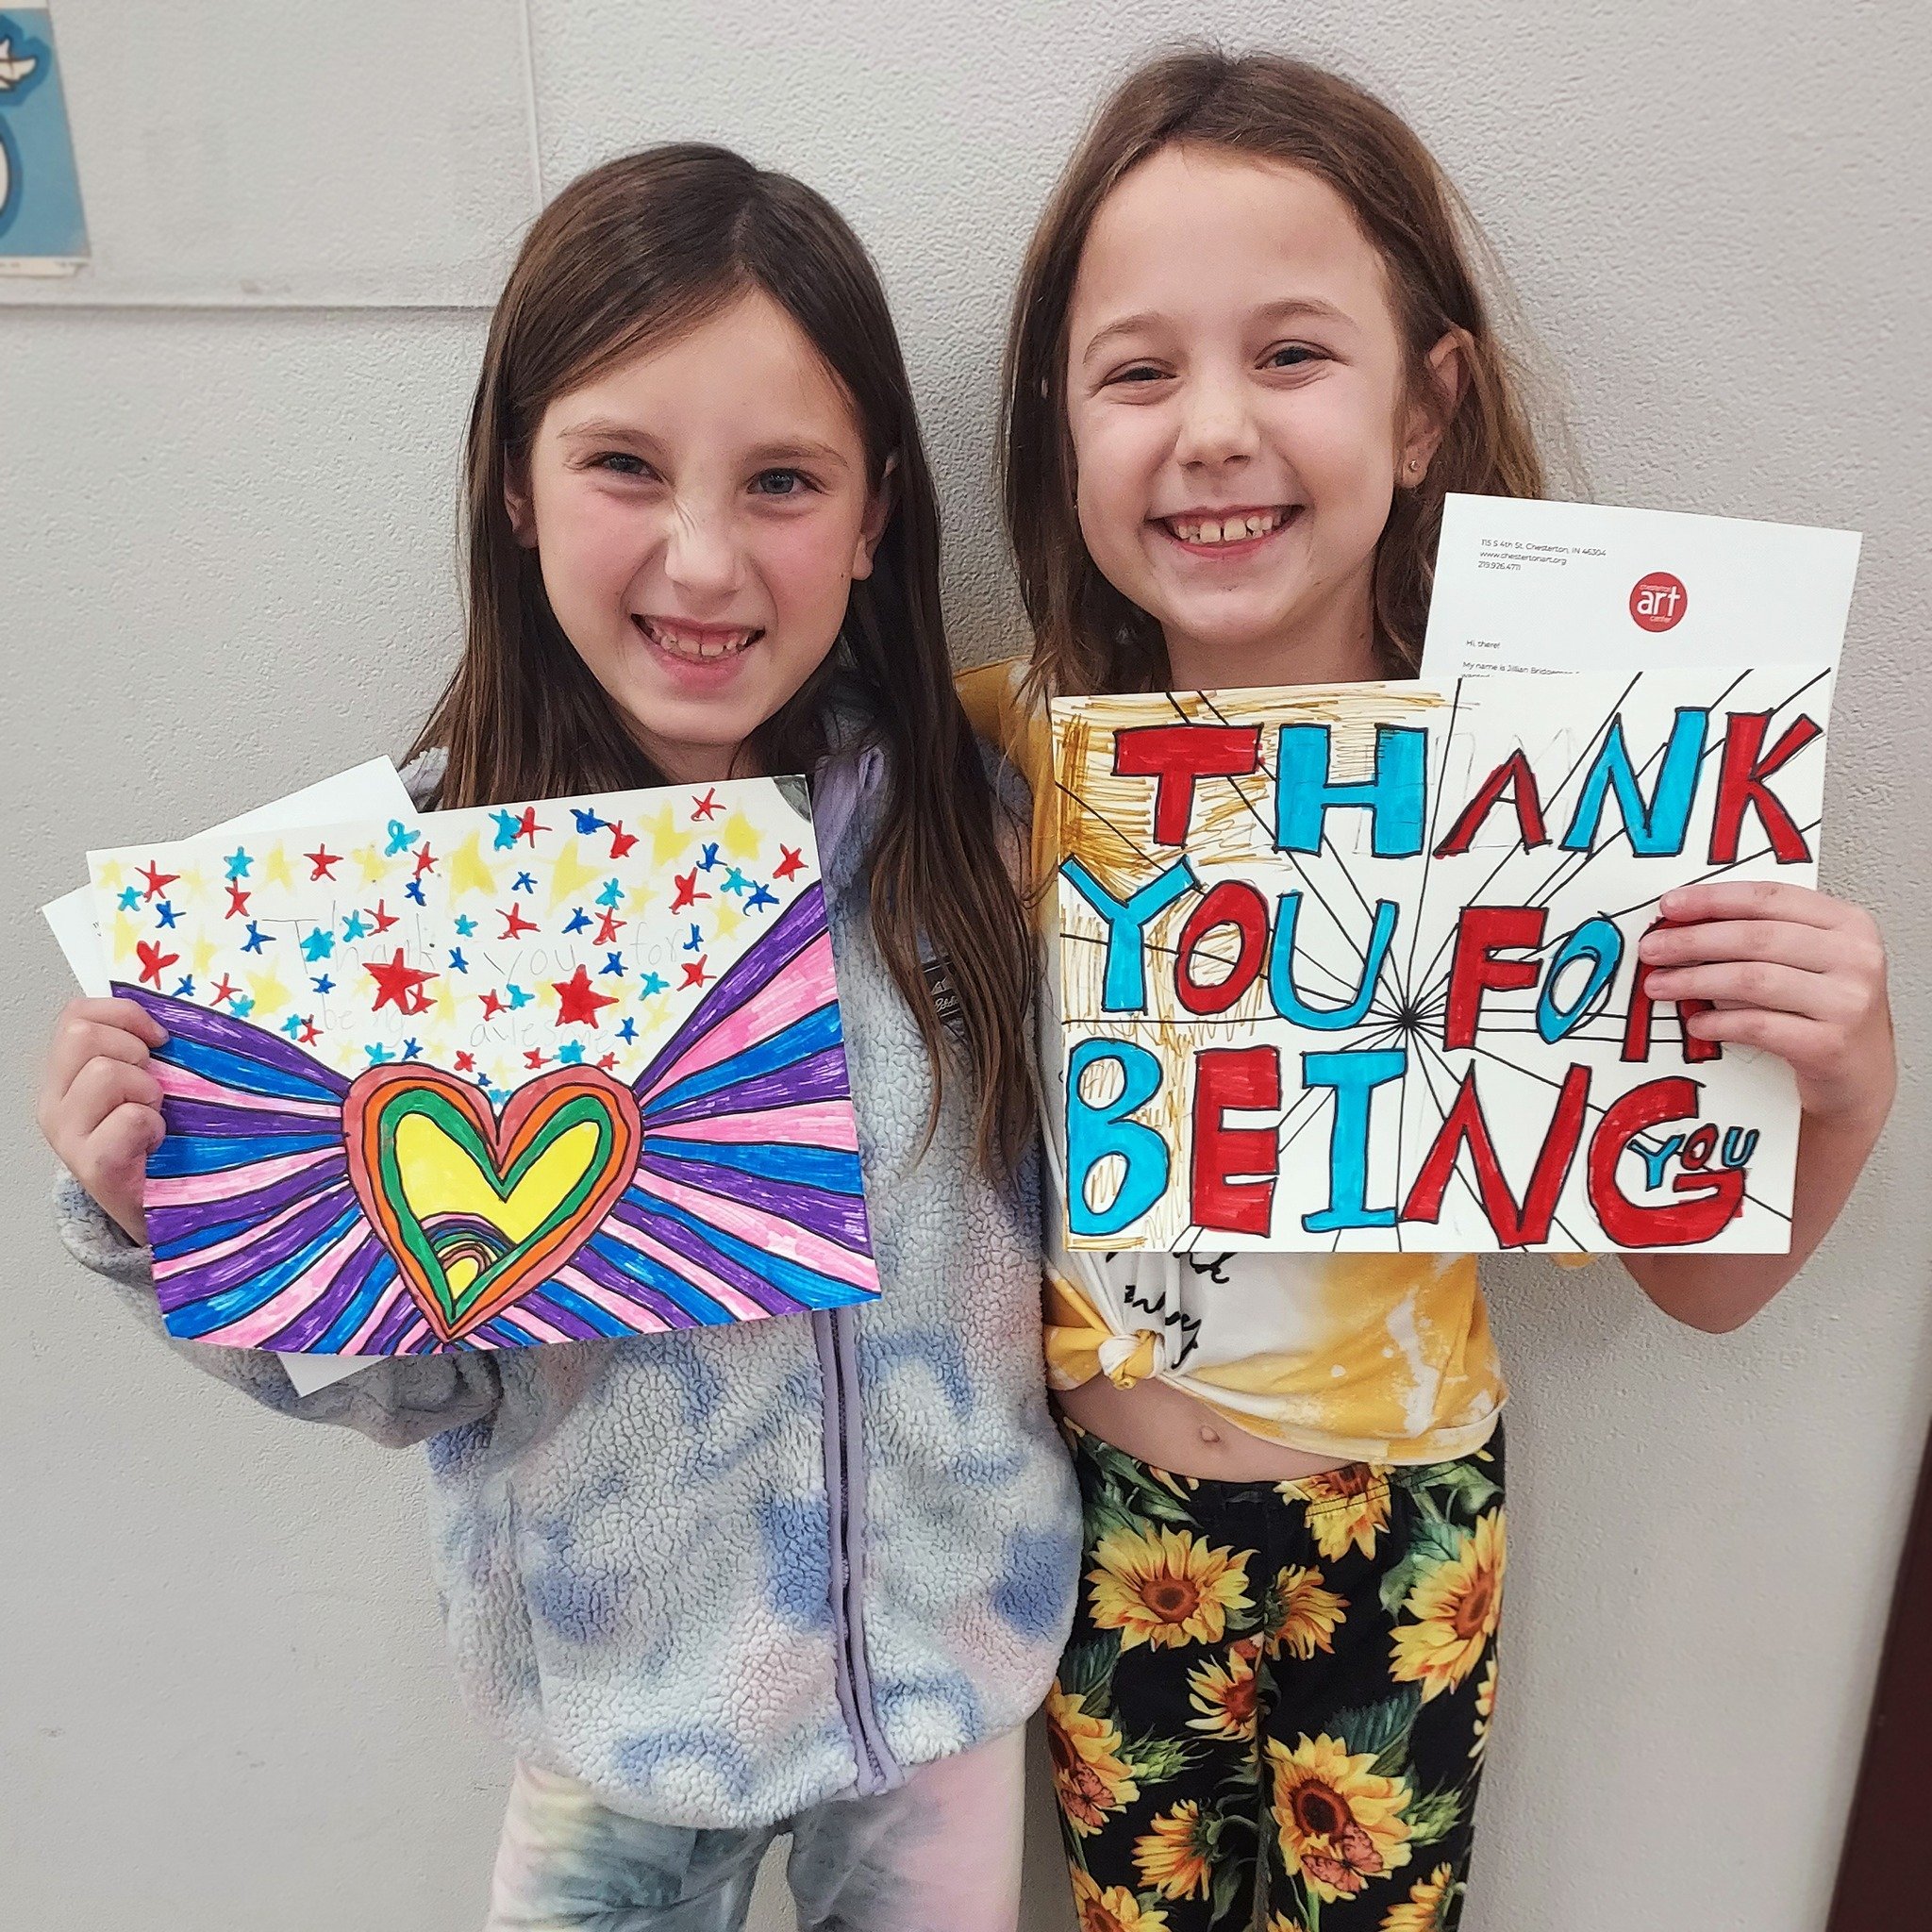 This week wrapped up this school year's 25-week Youth Arts Outreach program in partnership with the Duneland Boys &amp; Girls Club and the Duneland Family YMCA.

We want to express our gratitude to our Youth Arts Outreach site partners and their wond